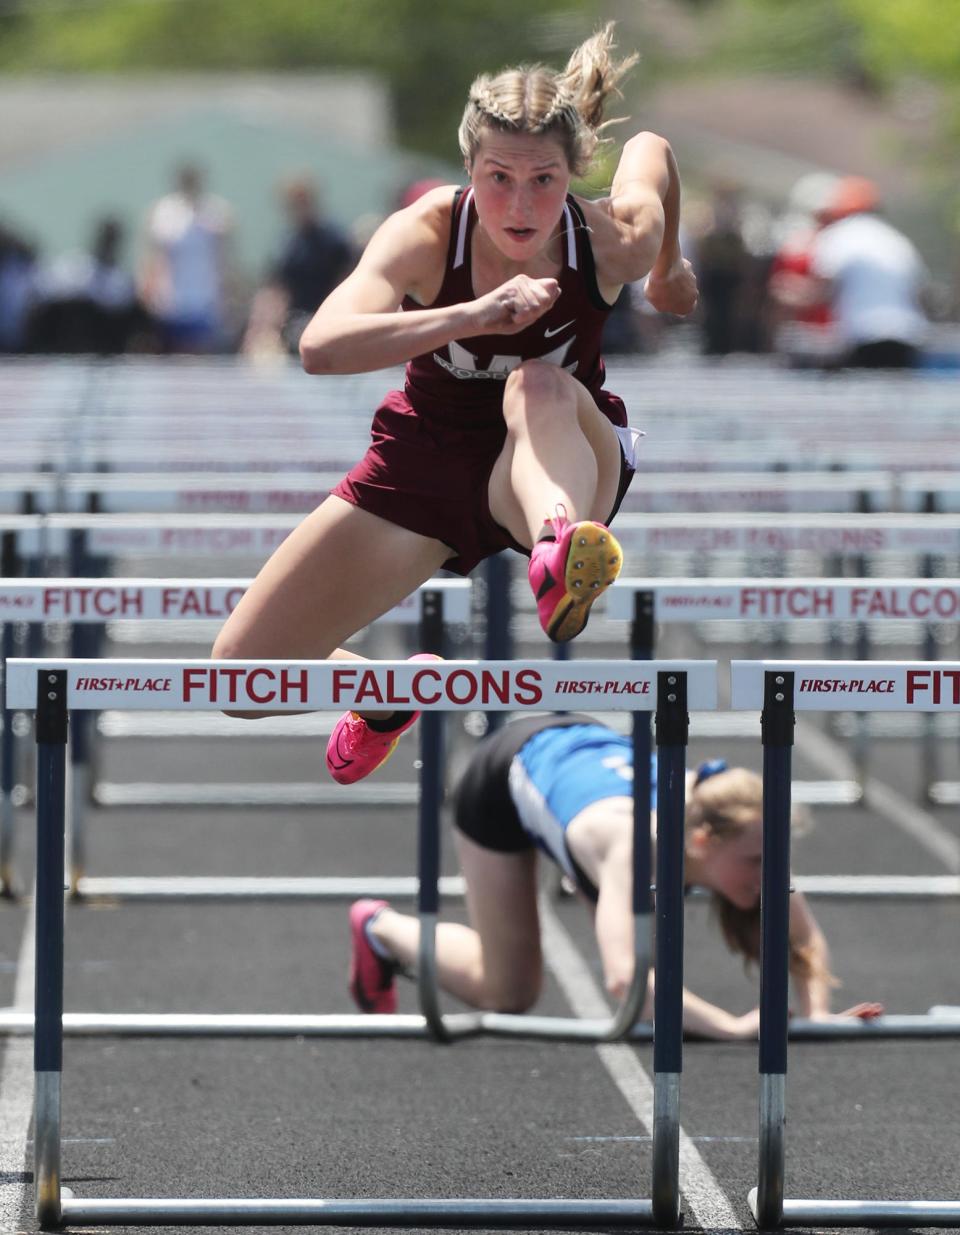 Woodridge's Anna Rorrer clears the final hurdle on her way to victory as Ravenna's Avonlea Jefferson falls during the girls 100-meter hurdles at the Division II regional meet Saturday at Austintown Fitch.